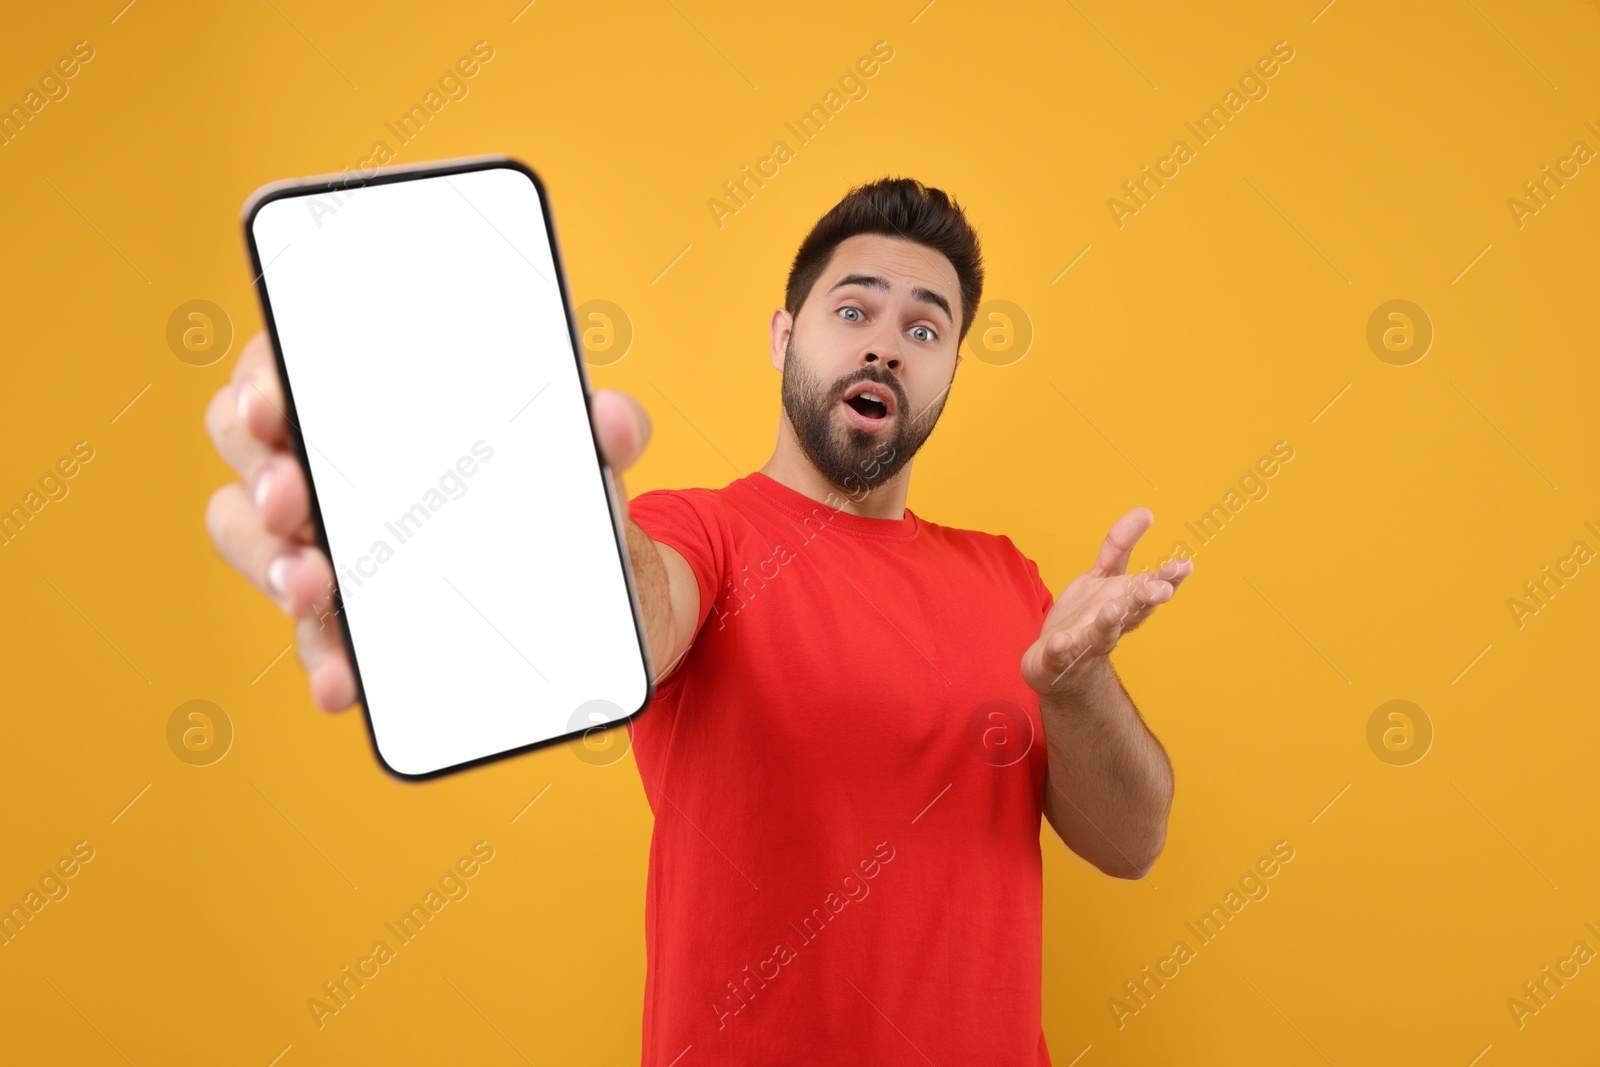 Photo of Surprised man showing smartphone in hand on yellow background